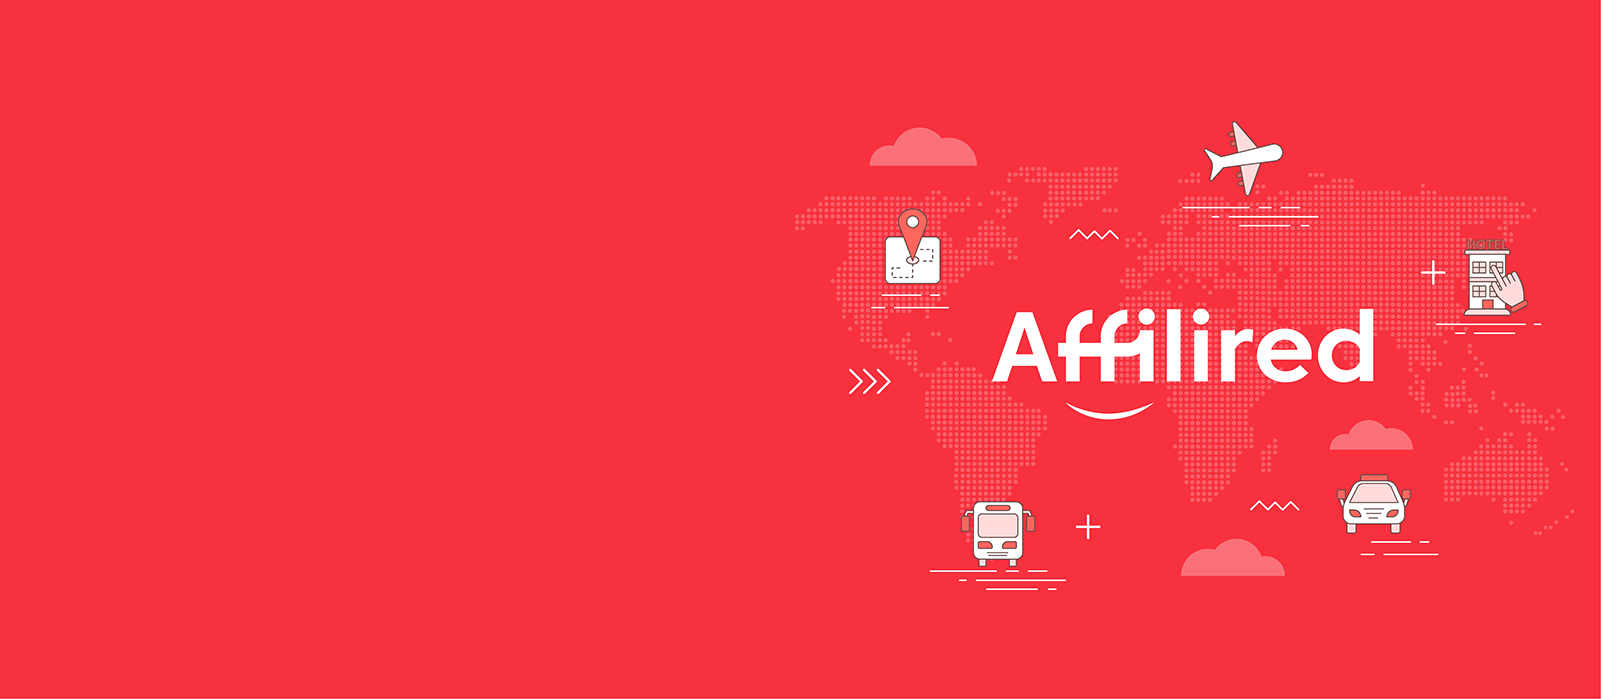 Affilired-Specialists-in -Digital-Marketing